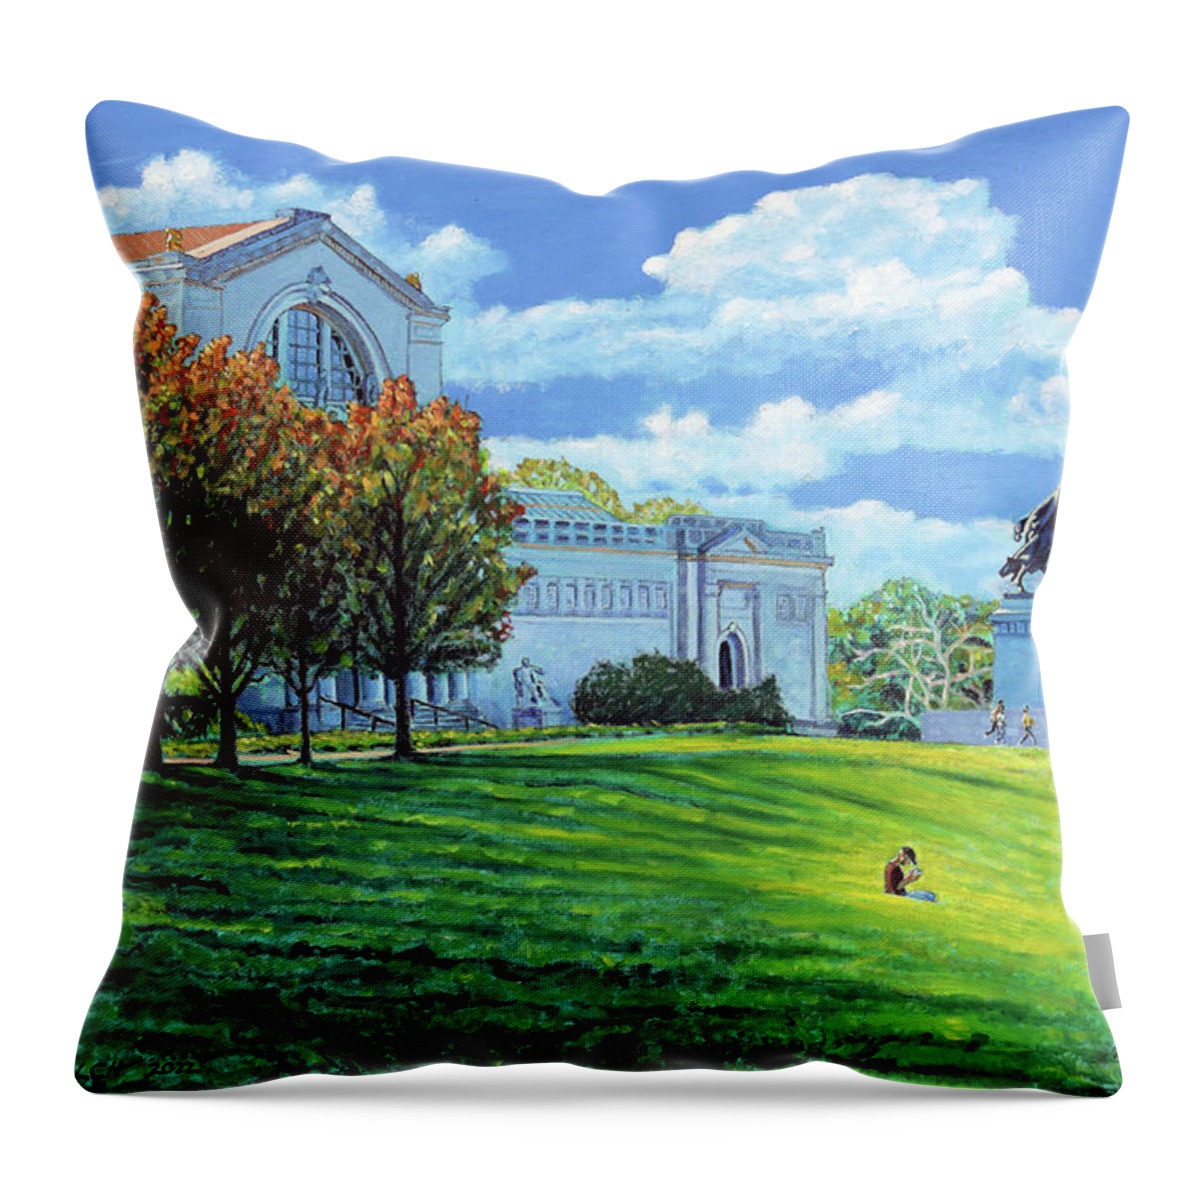 St. Louis Art Museum Throw Pillow featuring the painting Autumn On Art Hill by John Lautermilch